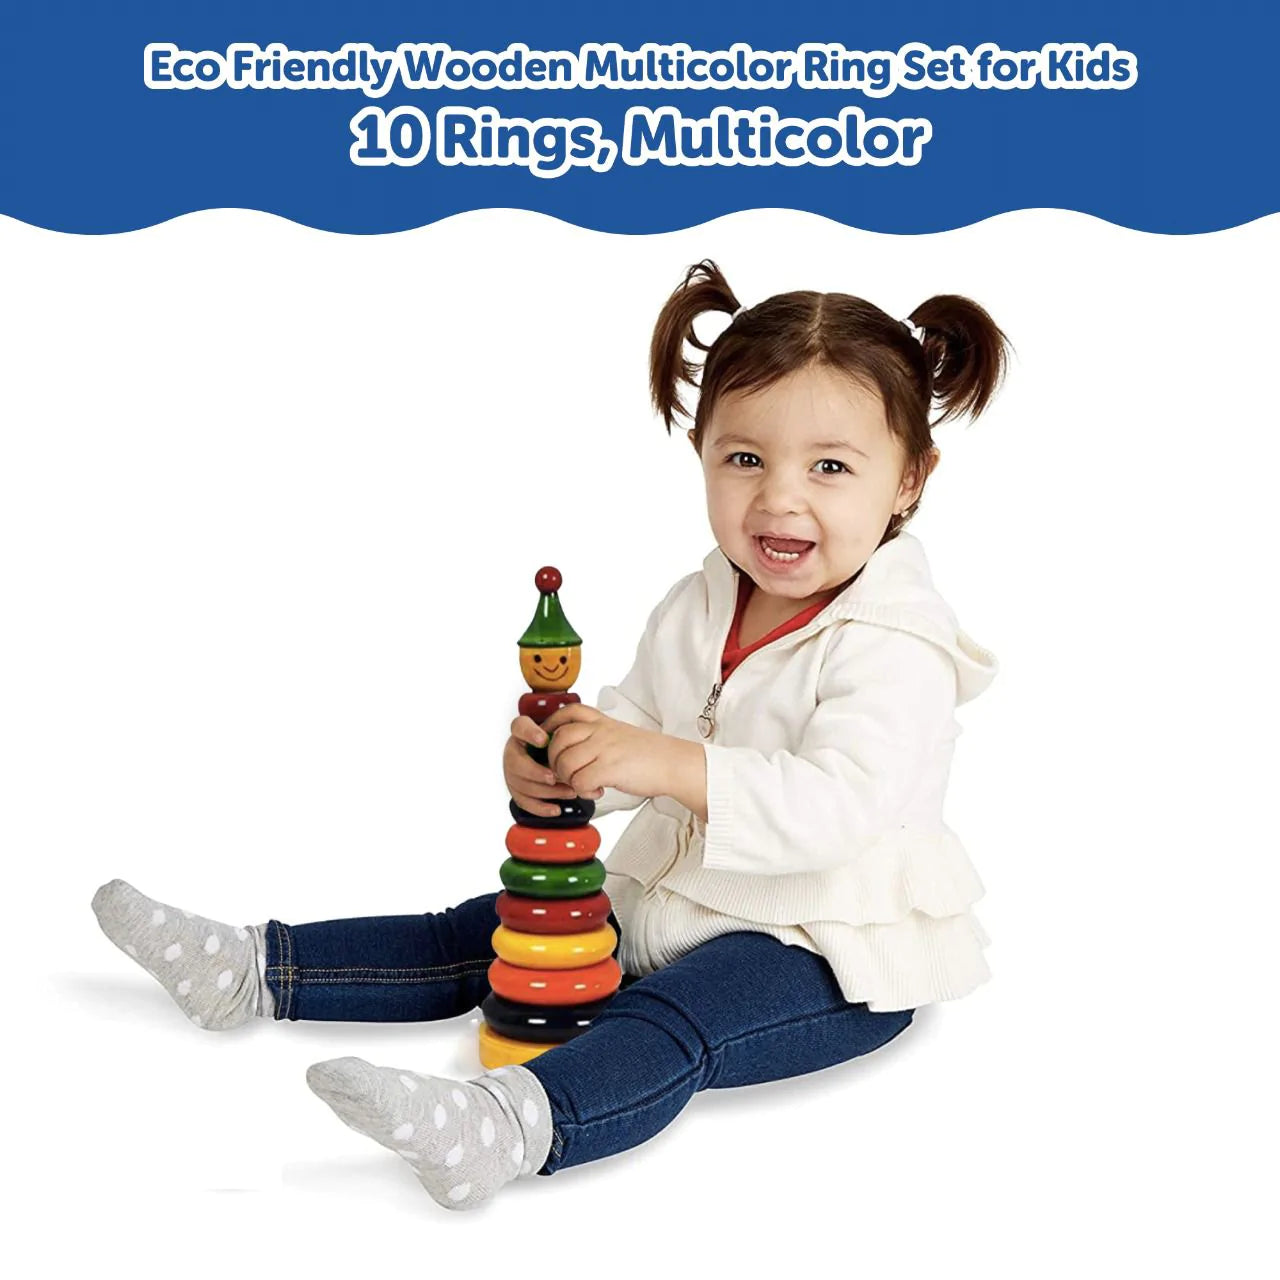 Buy Rainbow Stacking Wooden Ring Tower - SkilloToys.com